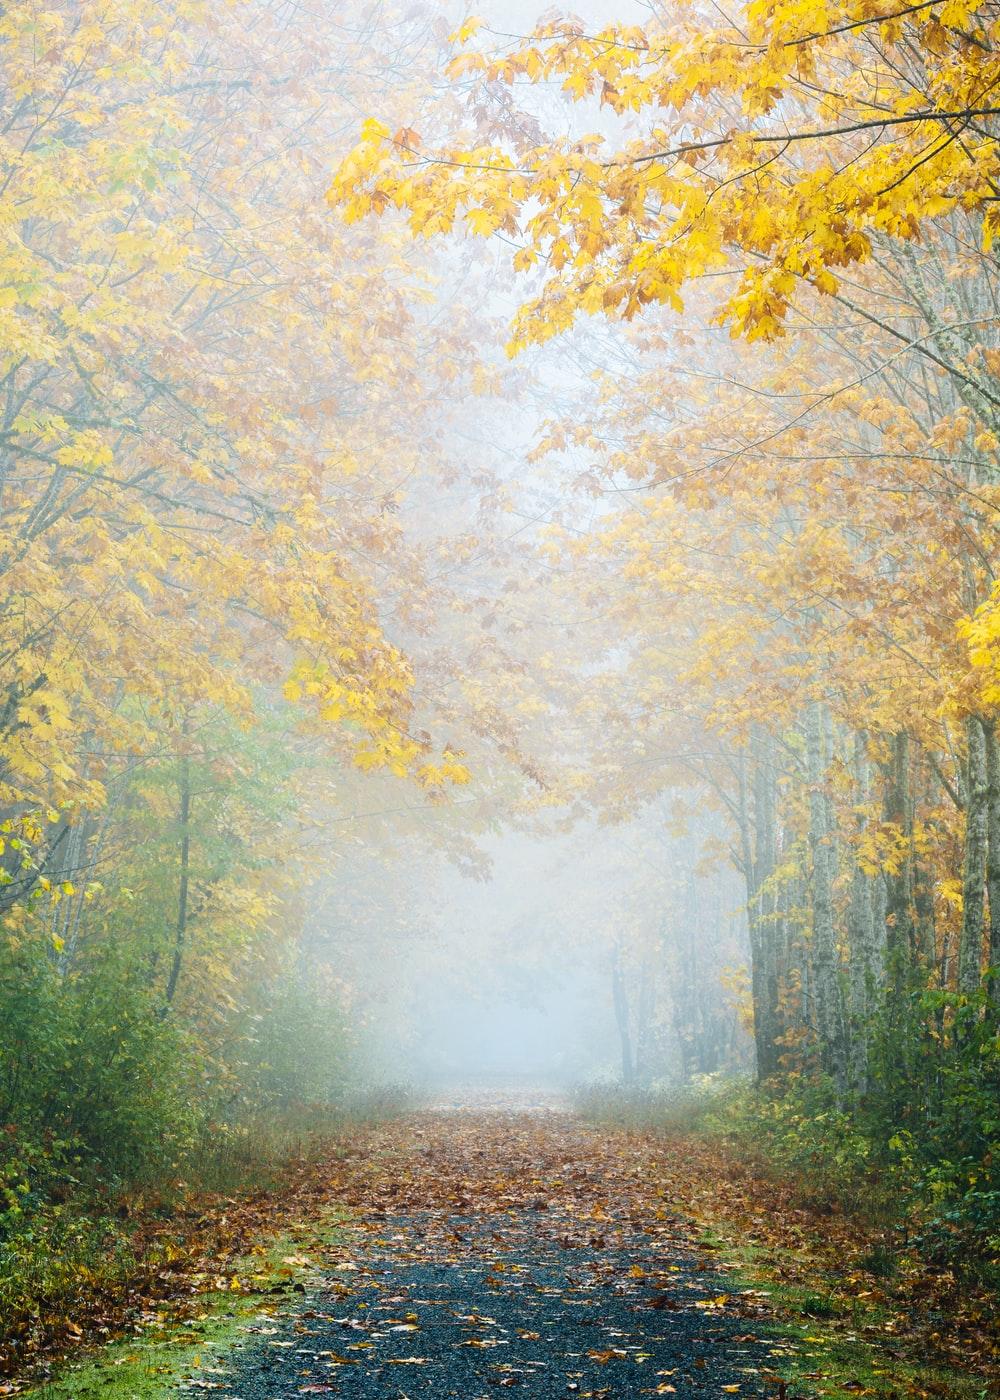 Misty Autumn Path Picture. Download Free Image